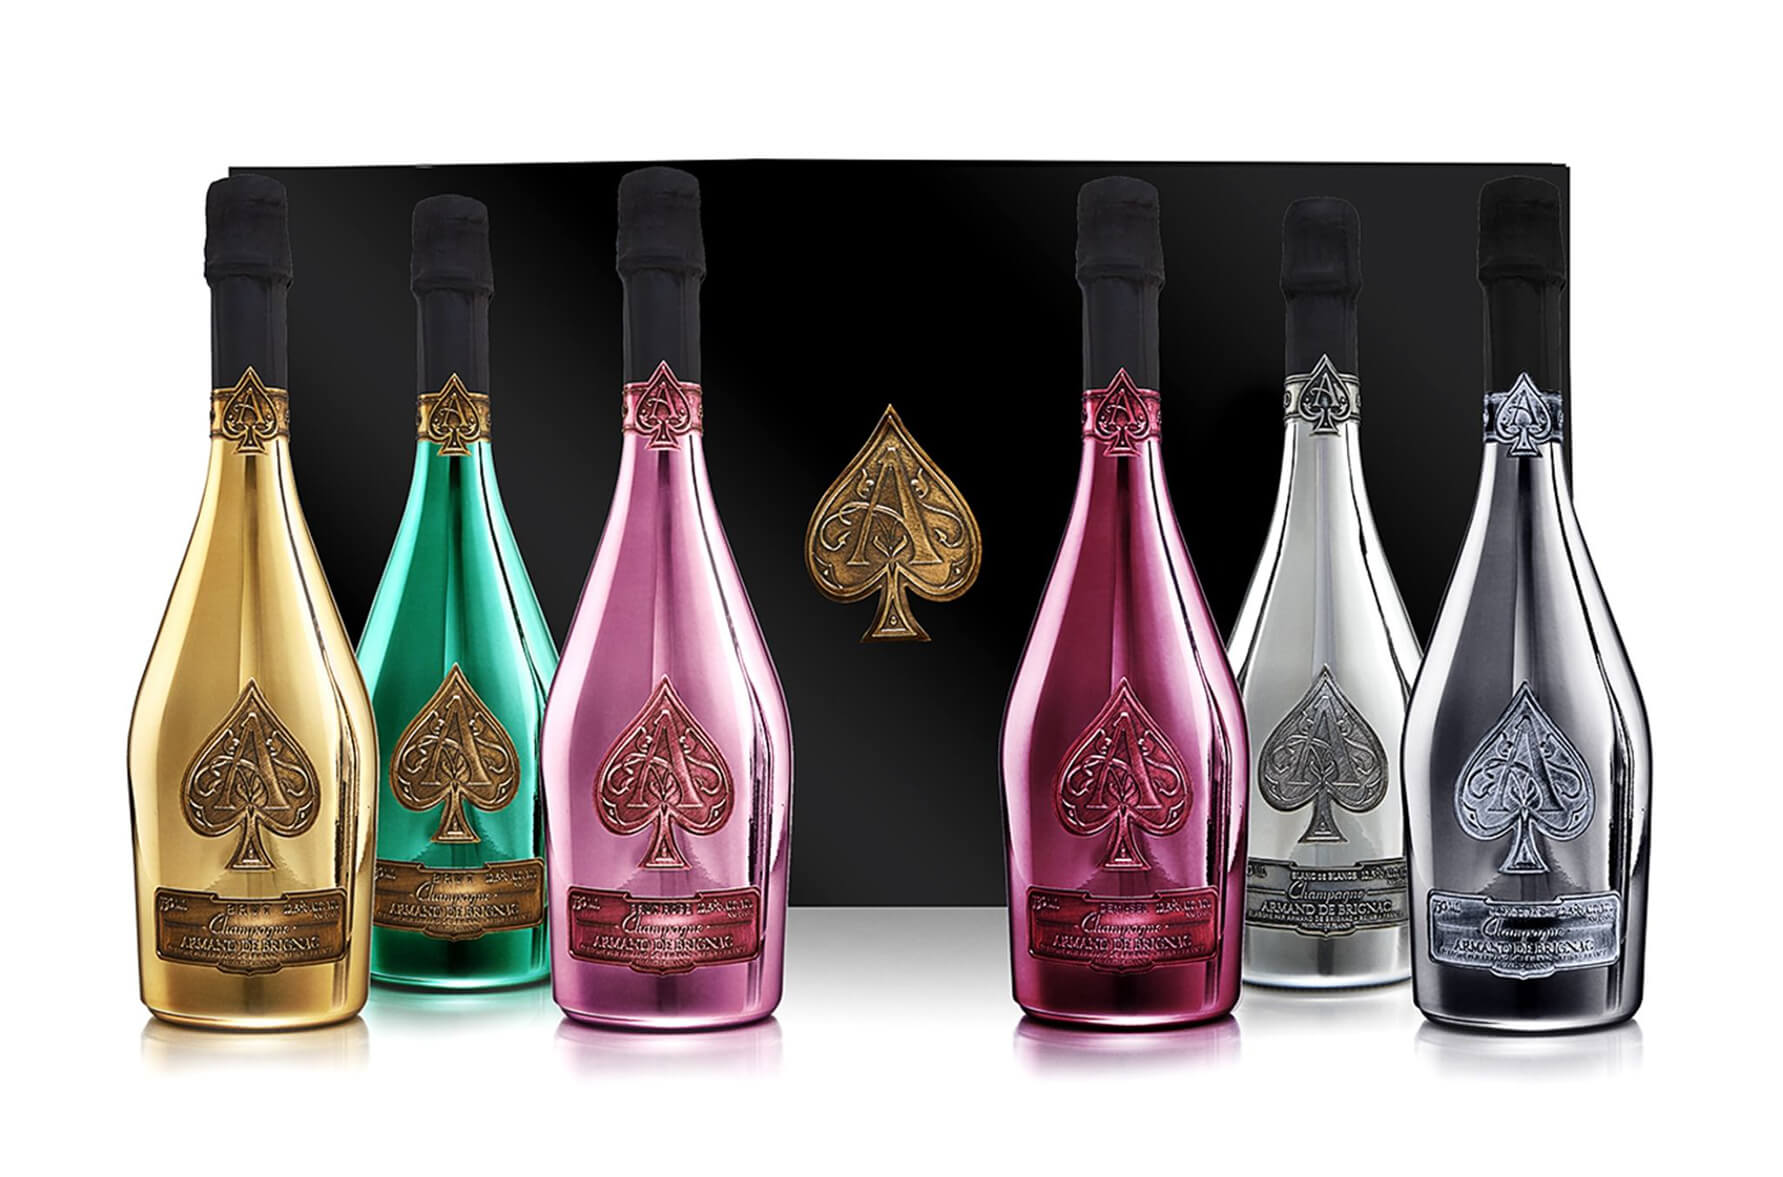 Jay Z Bought Armand De Brignac, Which Sells £120,000 Champagne